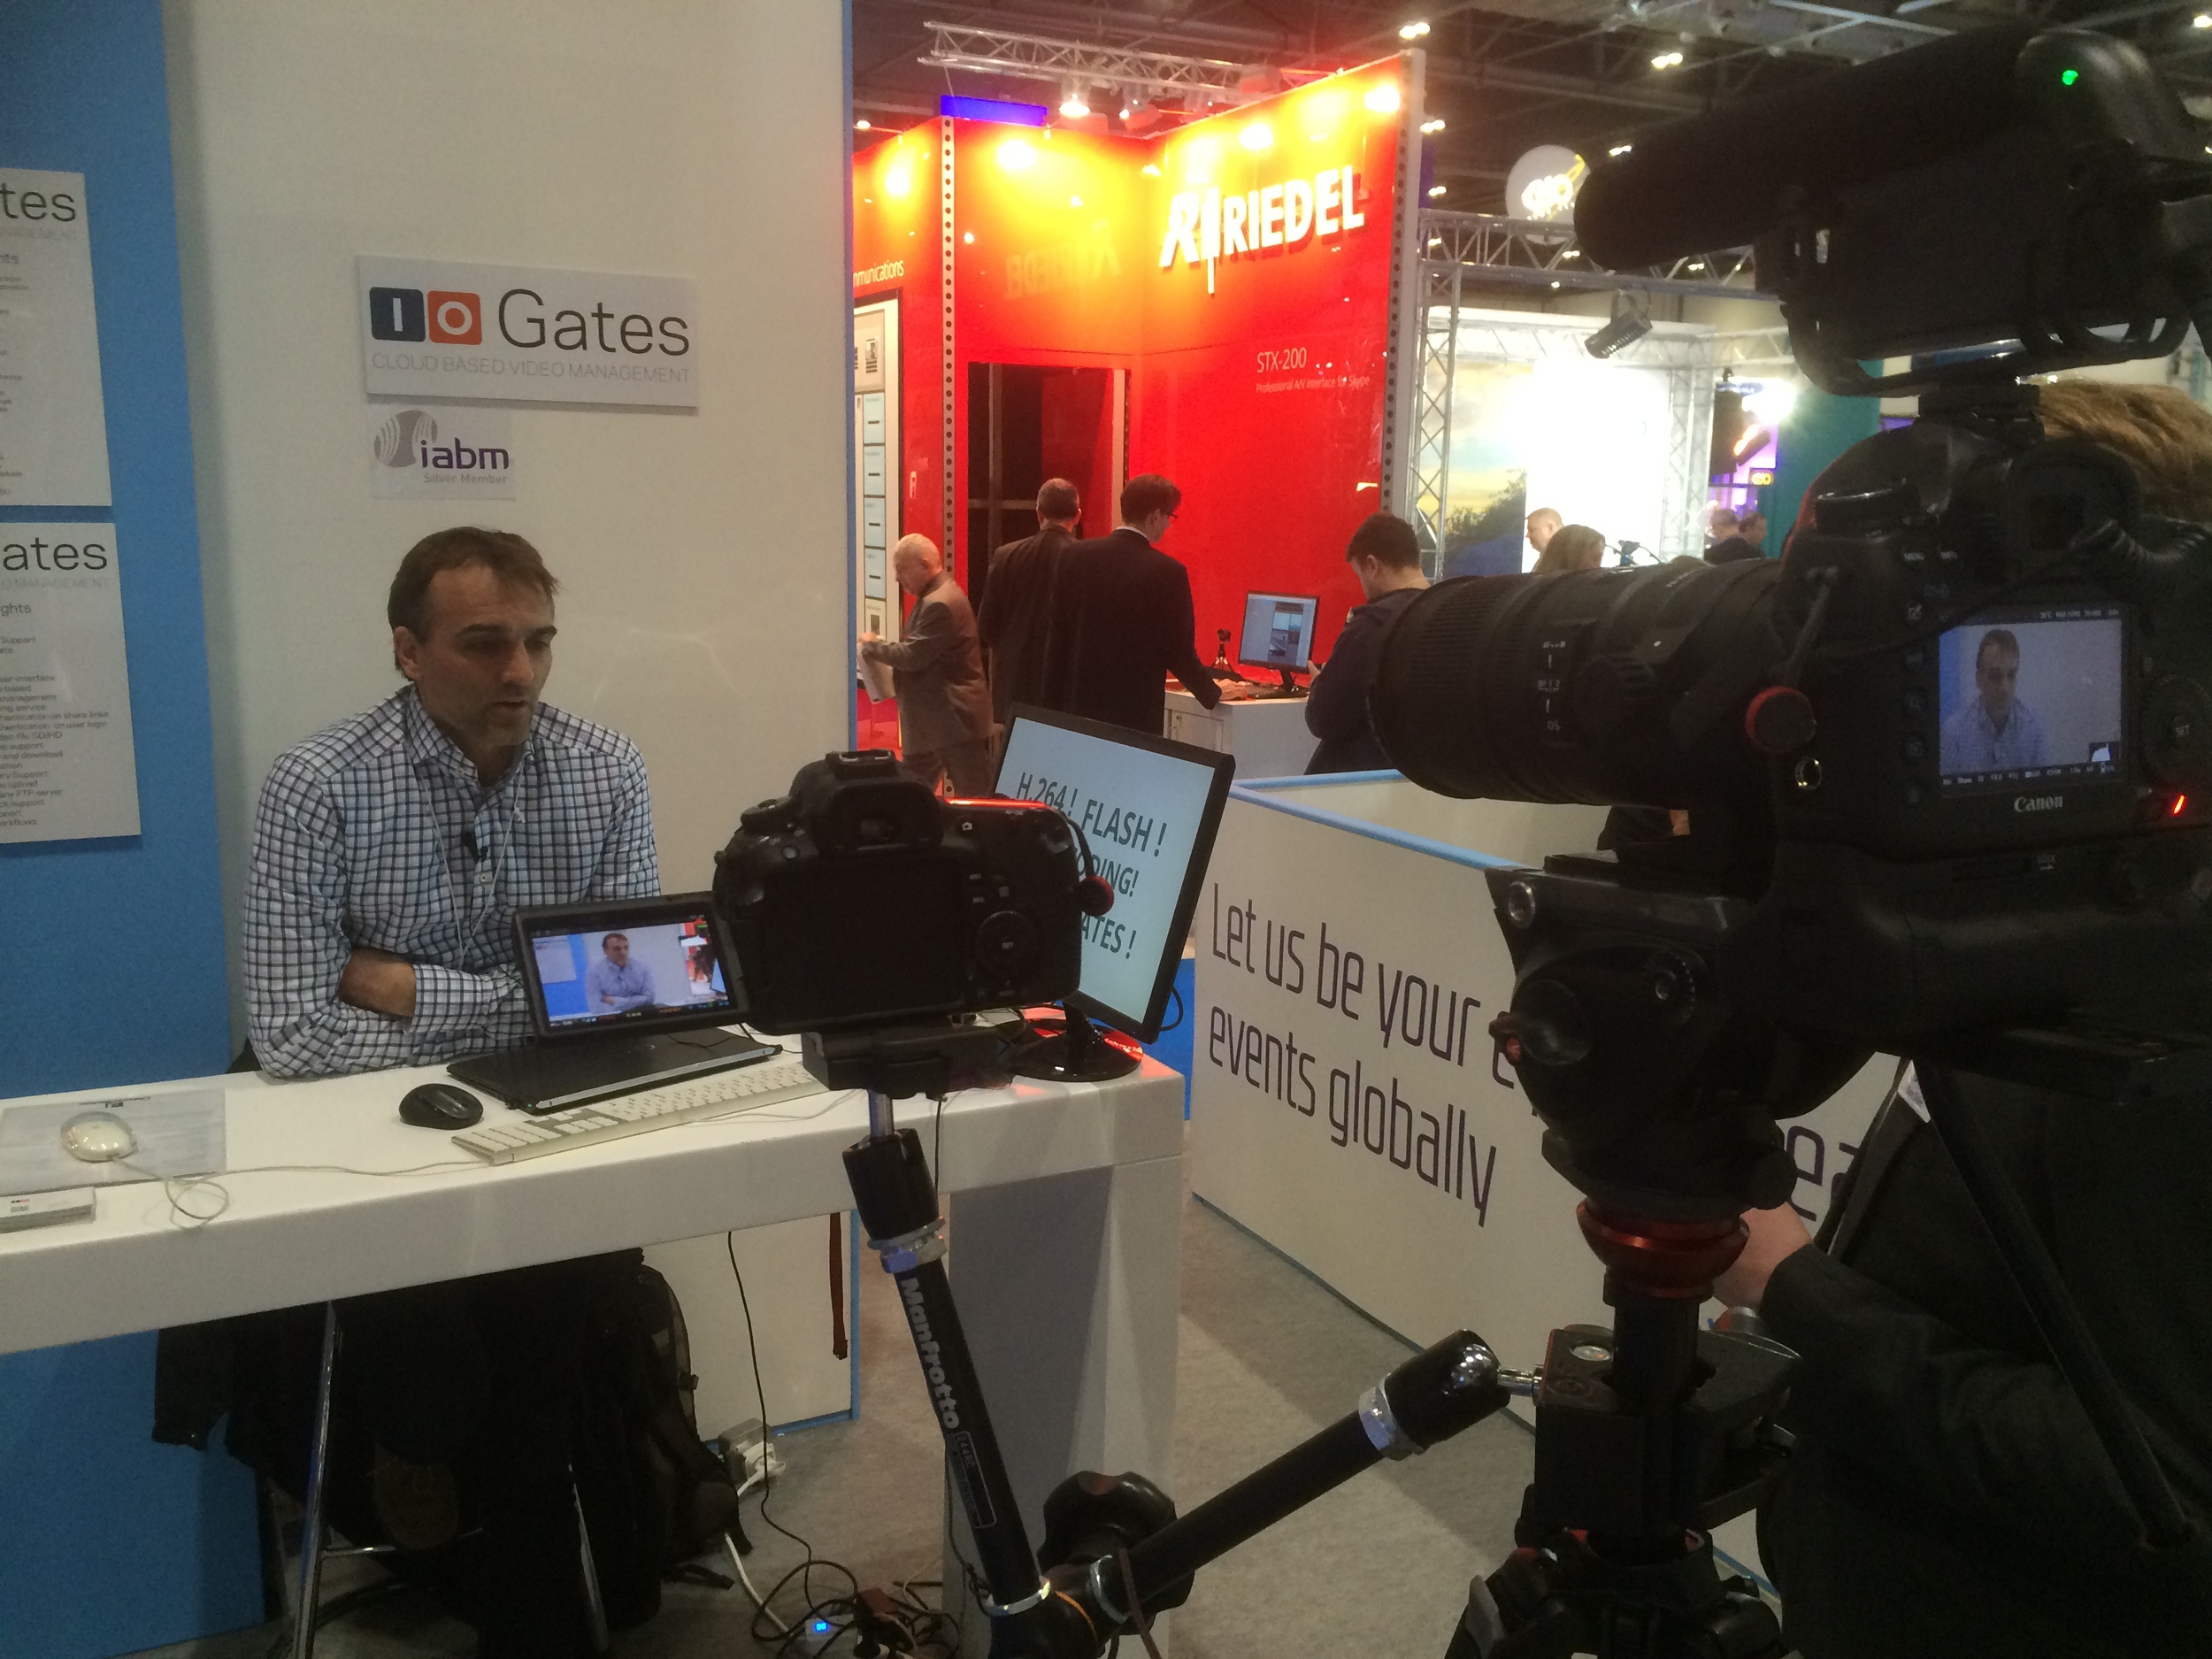 Jesper from ioGates talks to IABM TV about their BVE show experience and benefits of being a member